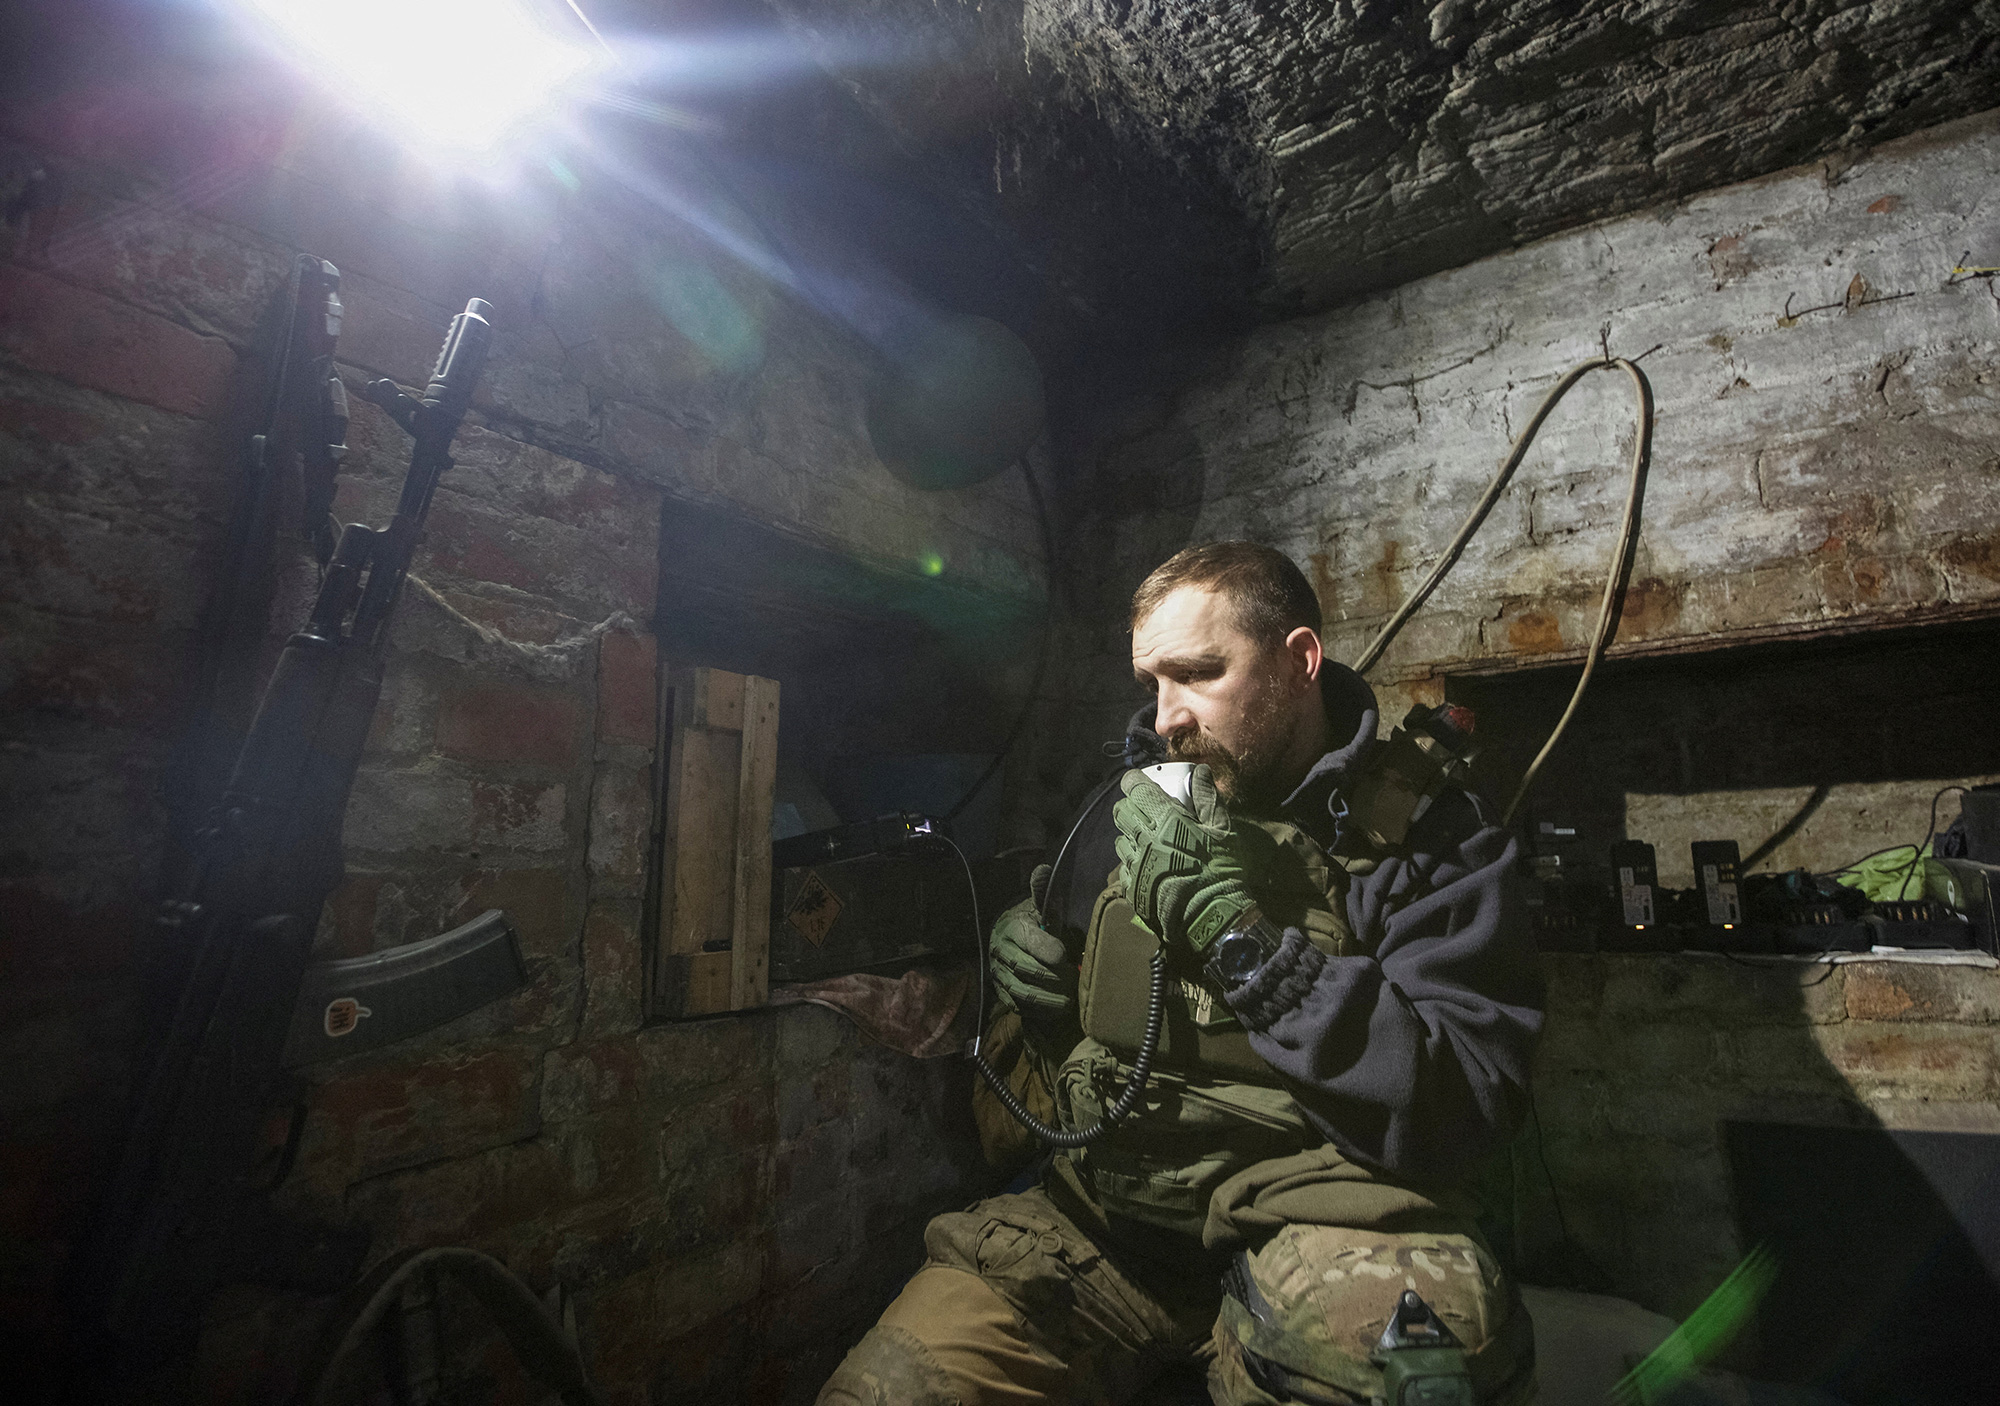 A Ukrainian service member uses a radio in a shelter near their position at a frontline in Bakhmut, Ukraine, on January 1. 